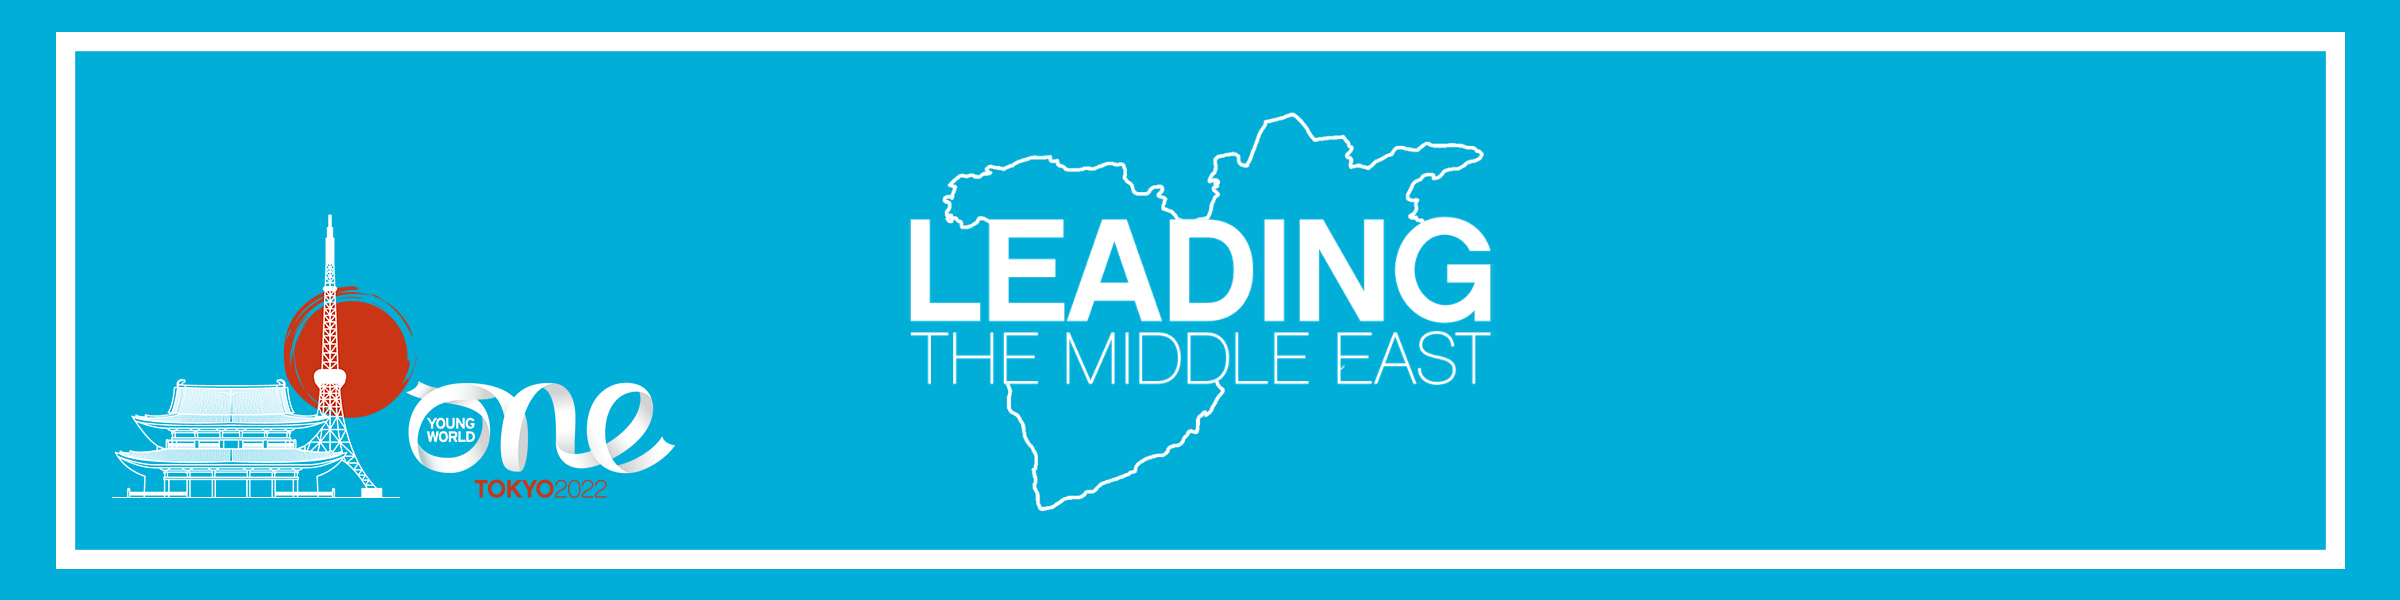 Leading Middle East Banner